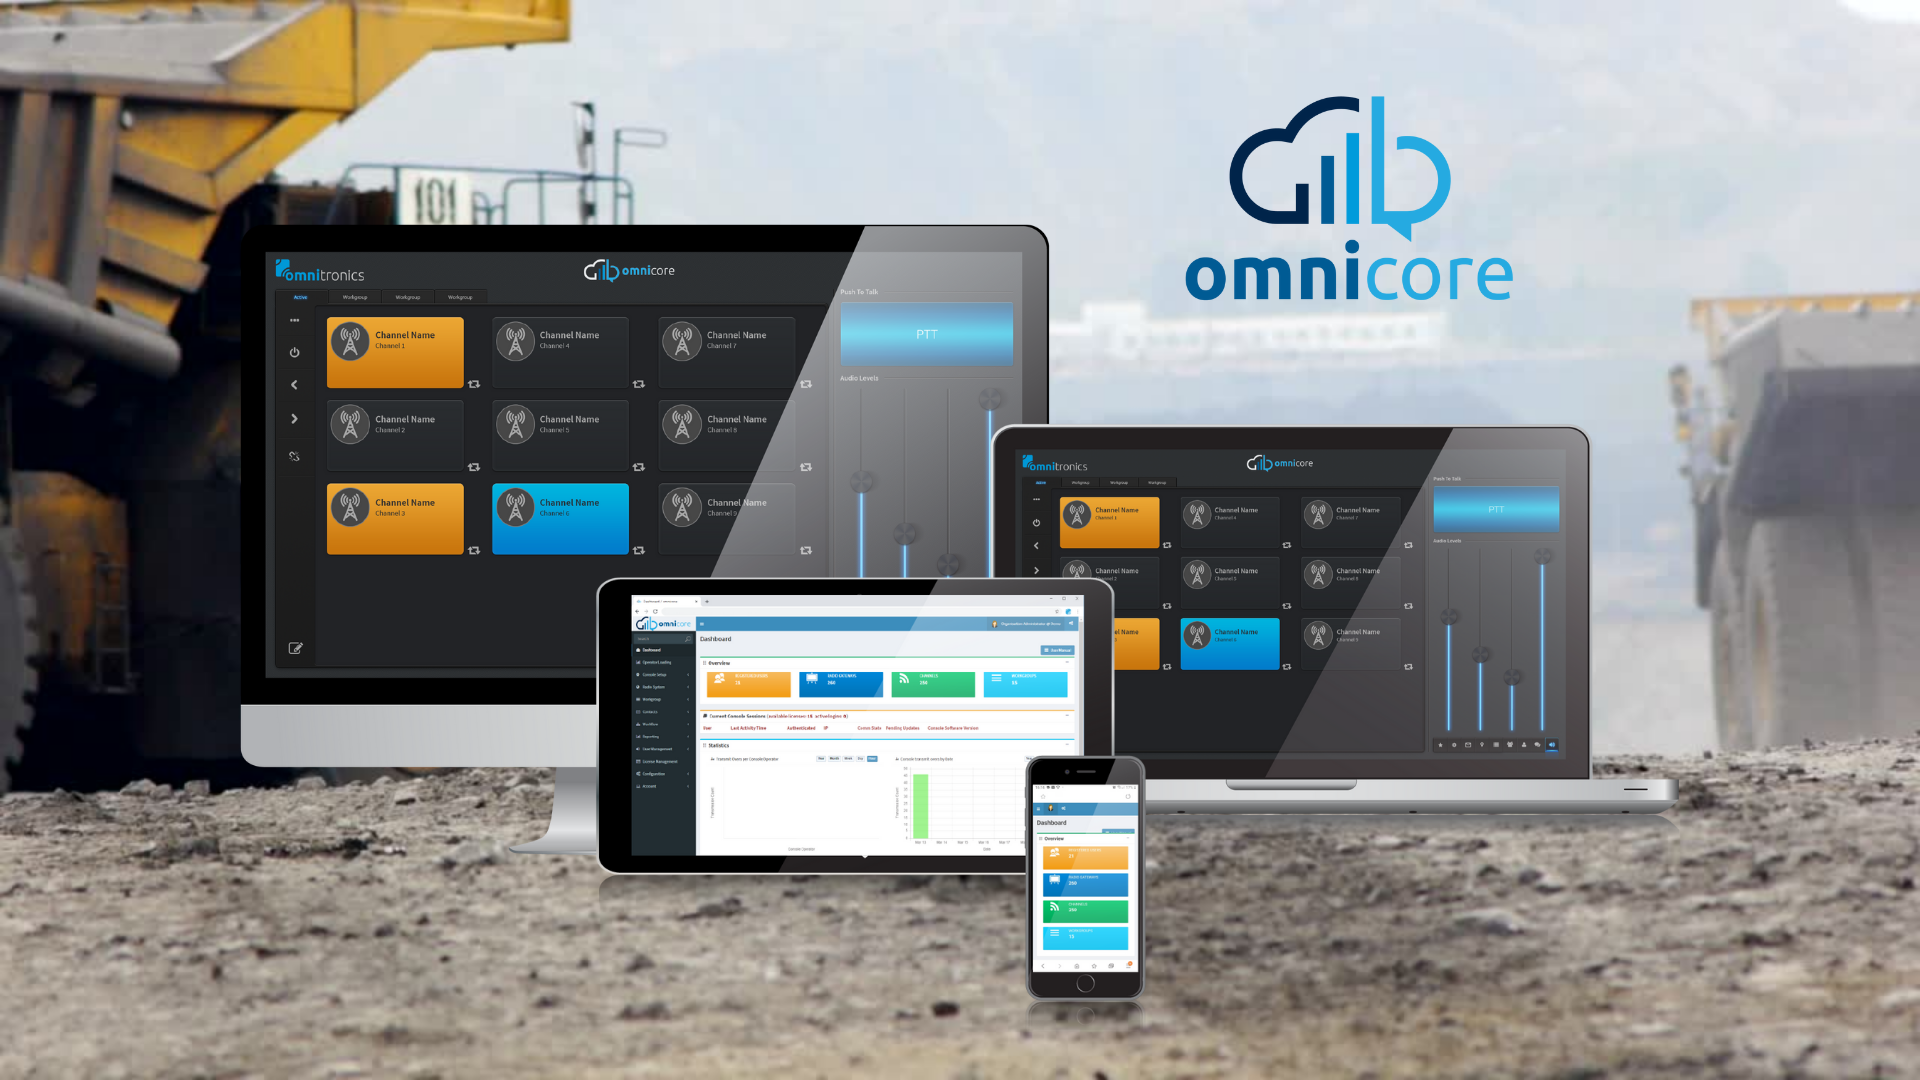 Omnitronics has been awarded a contract to supply and install omnicore Enterprise Radio Dispatch to Mining company Rio Tinto in Western Australia